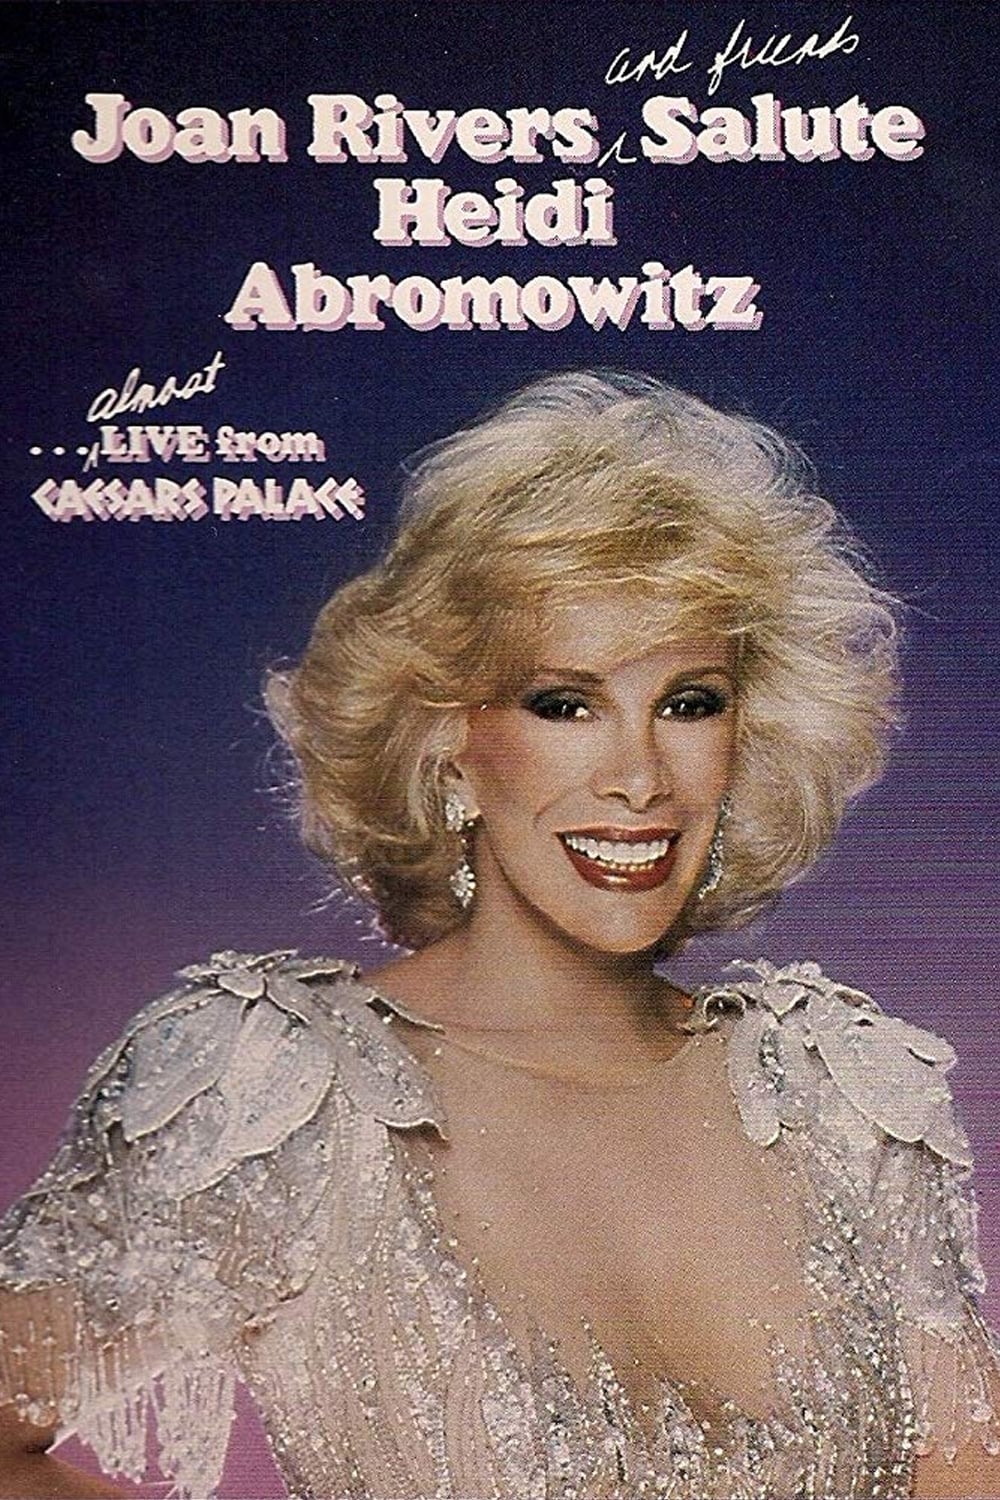 Joan Rivers and Friends Salute Heidi Abromowitz (1985)